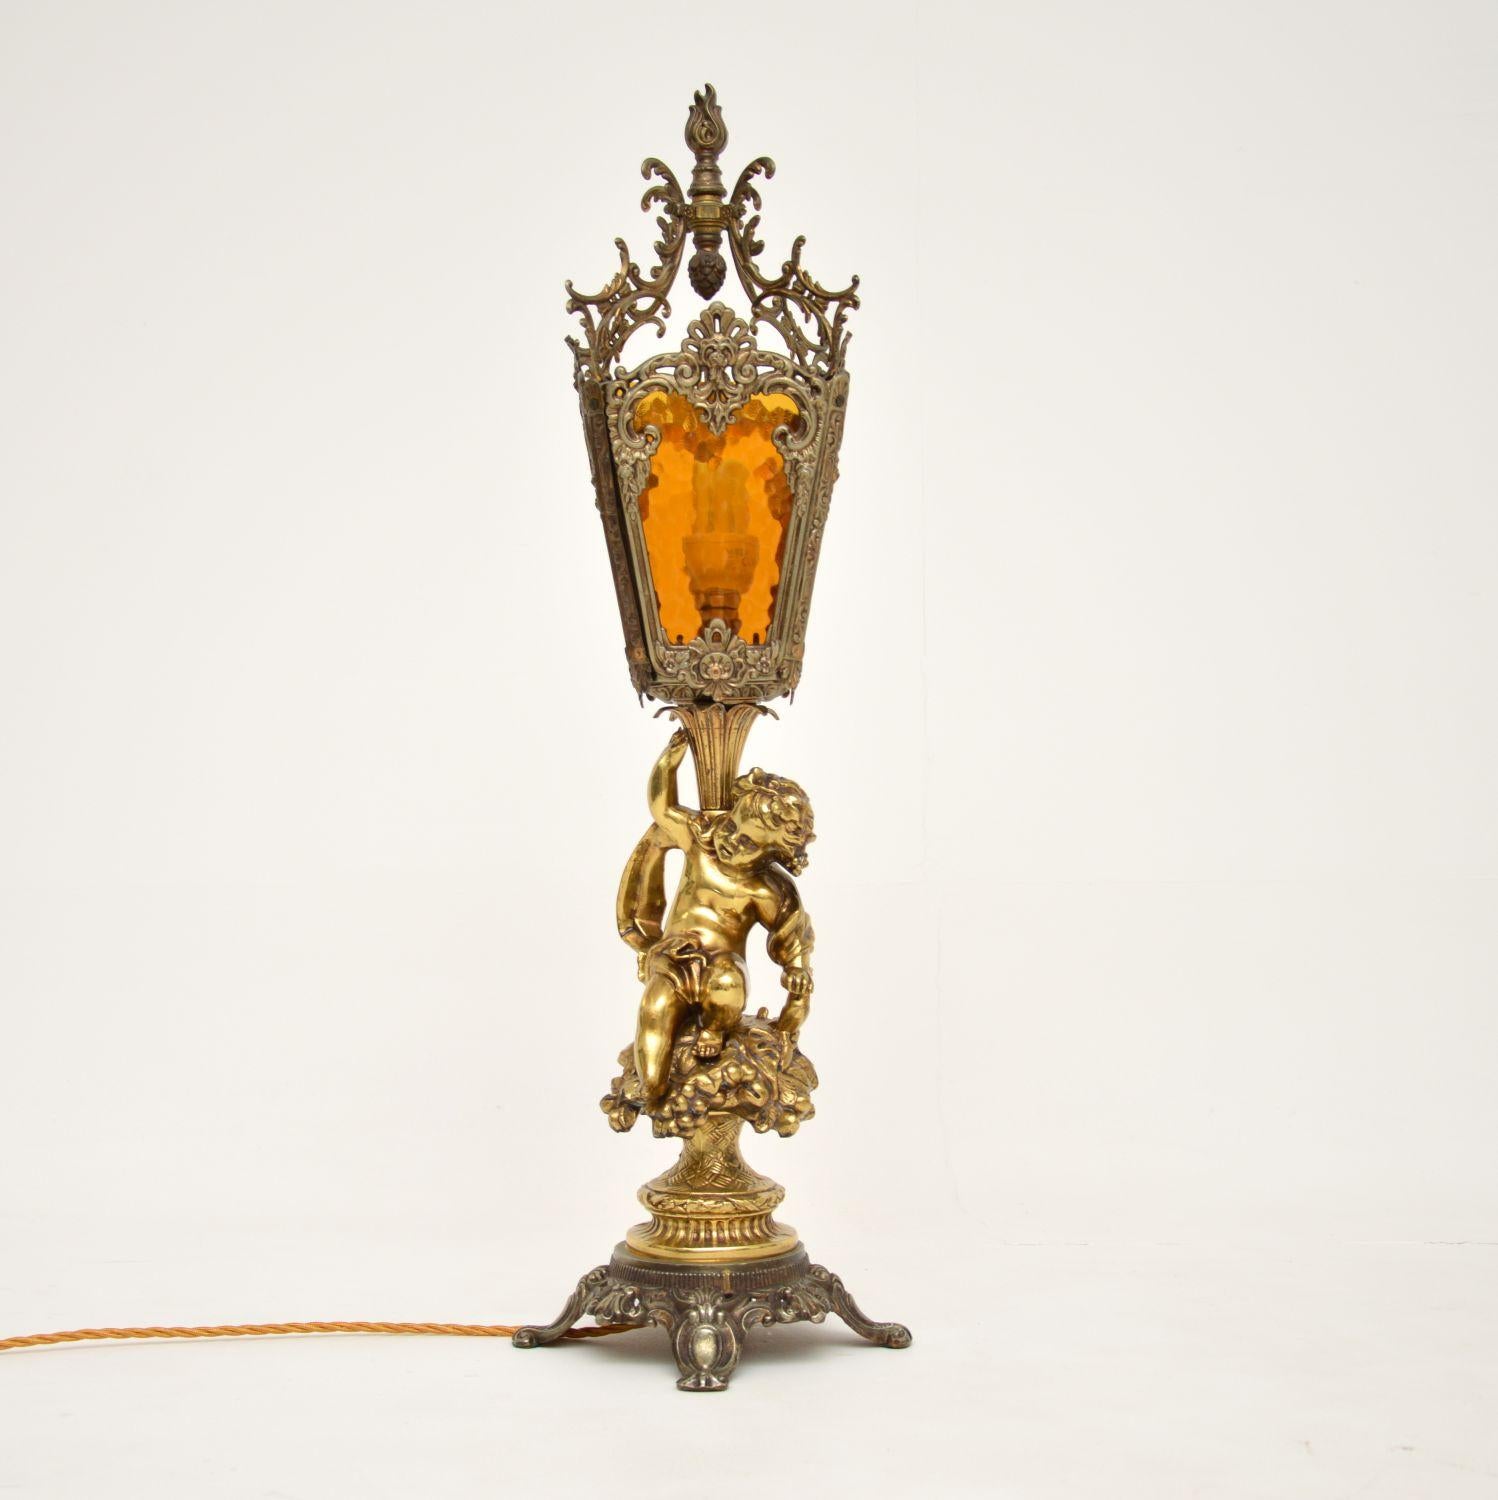 A large and stunning antique table lamp in gilt metal & brass, with original textured glass shade inserts. We believe it’s French & dates from around the 1930-50’s period.

It is of absolutely wonderful quality, with beautiful details all over. The